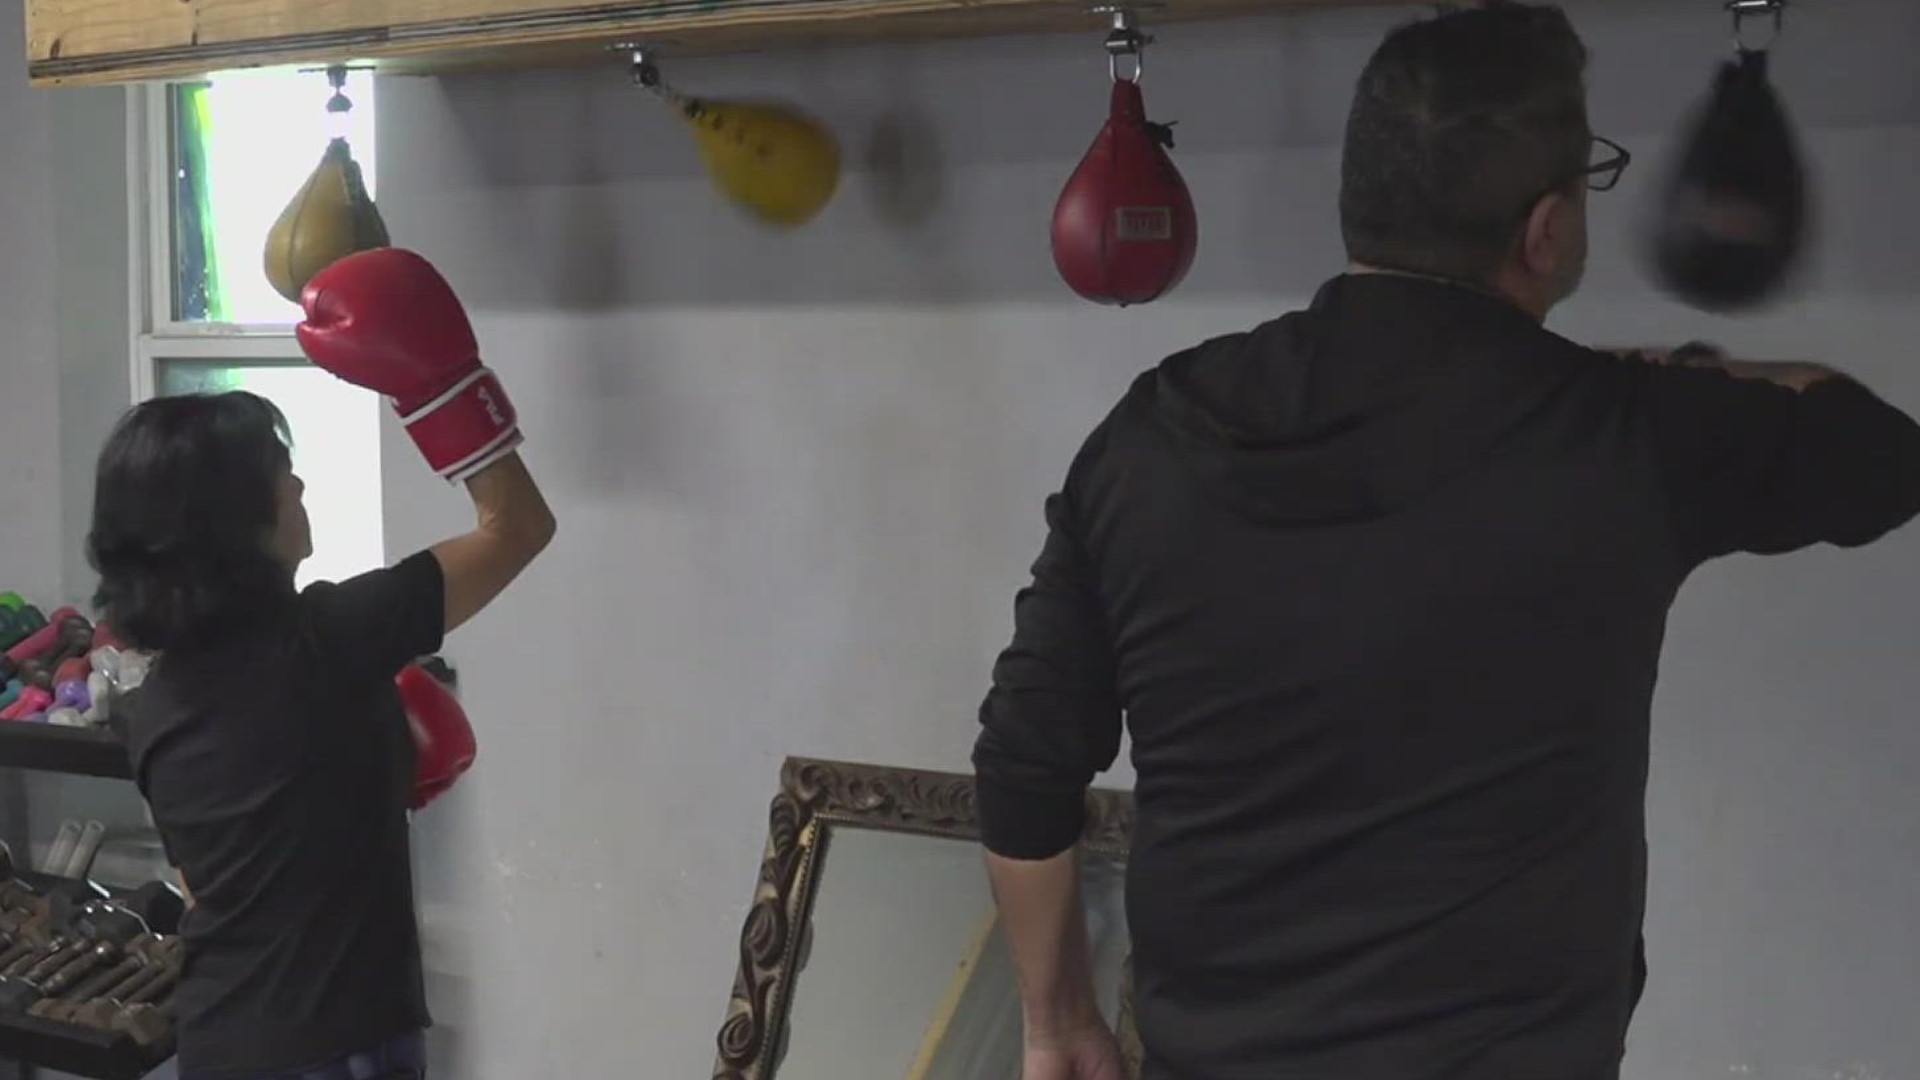 For people living with Parkinson's Disease, they're finding the strength to overcome it at Rock Steady Boxing Inc.